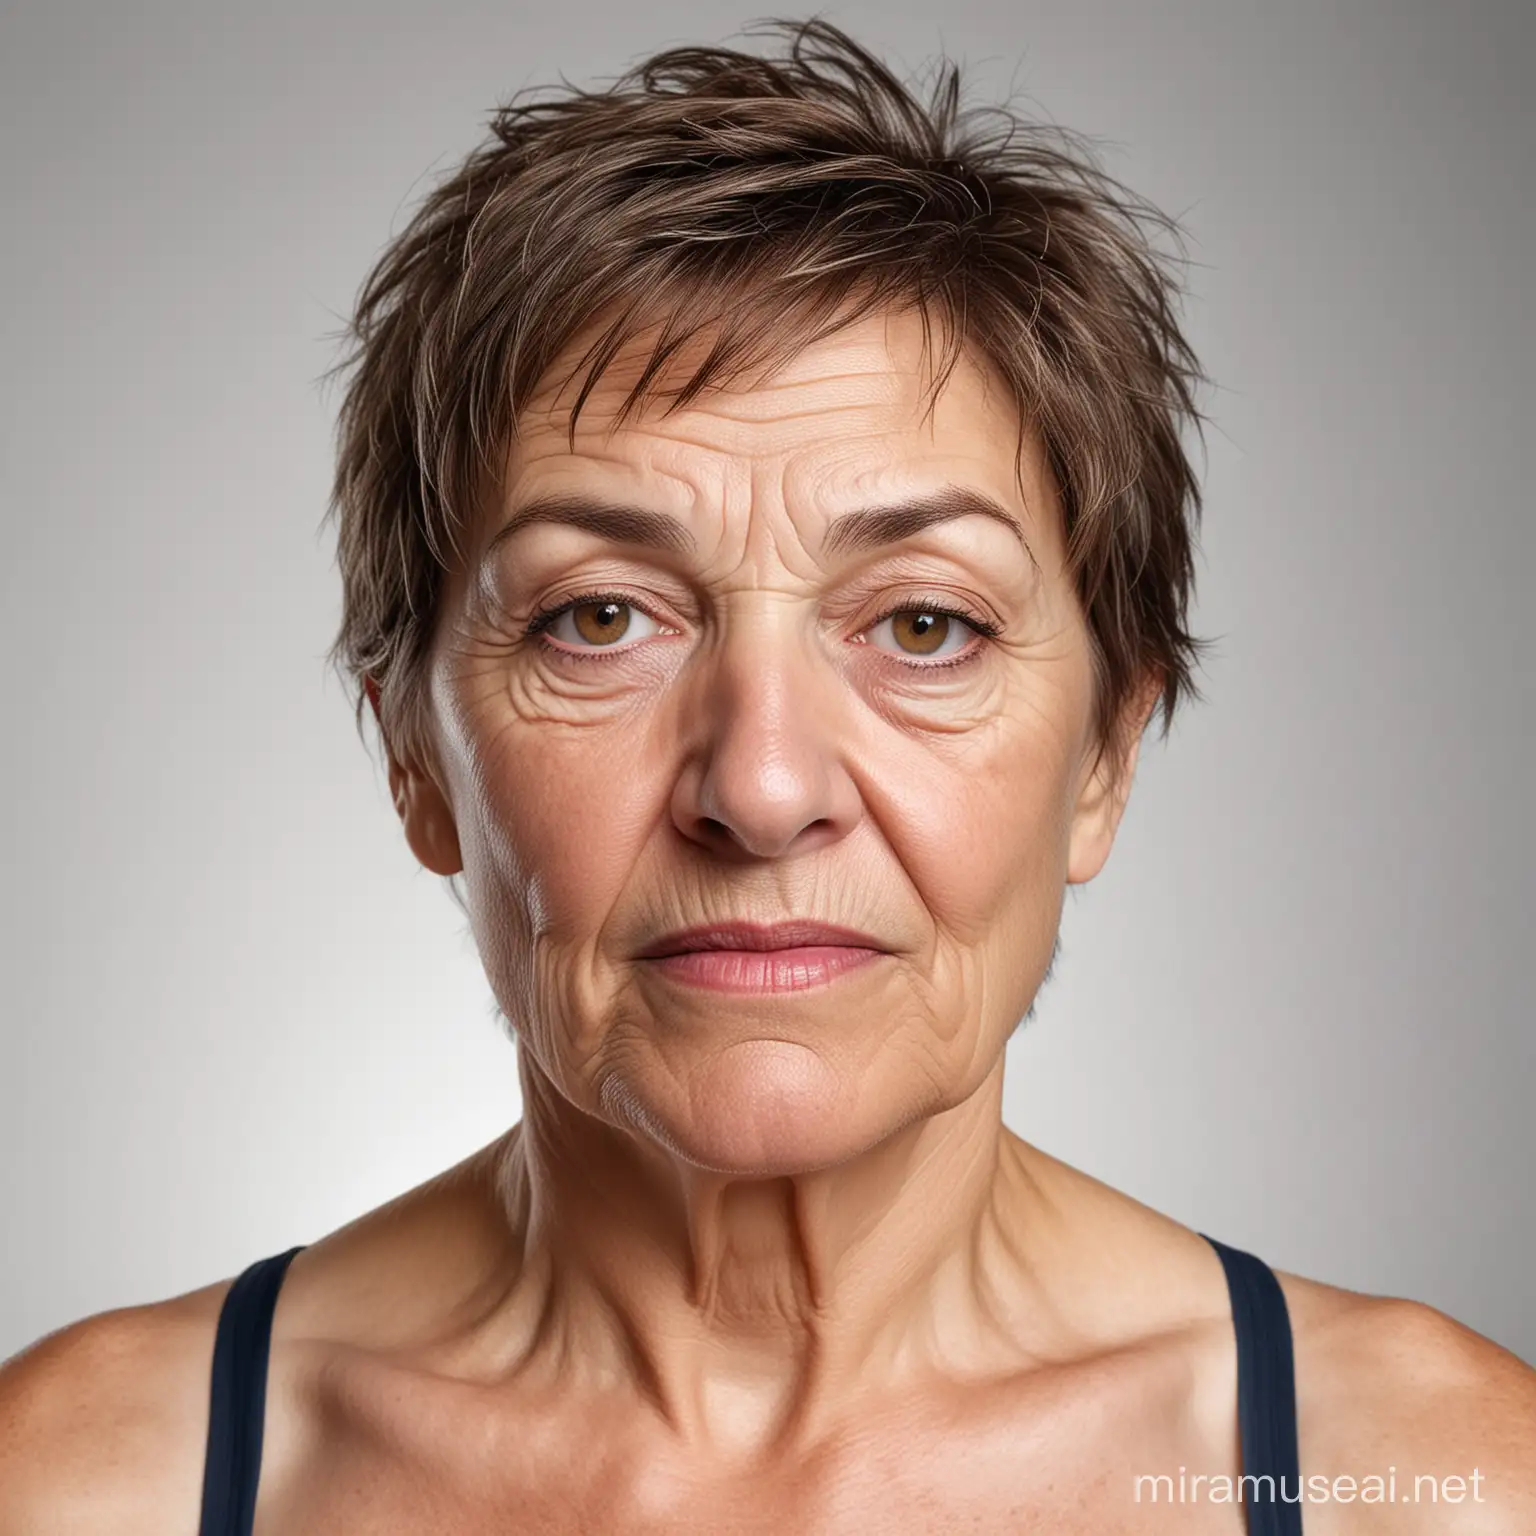 Realistic Ugly Older Woman Portrait in Professional Attire